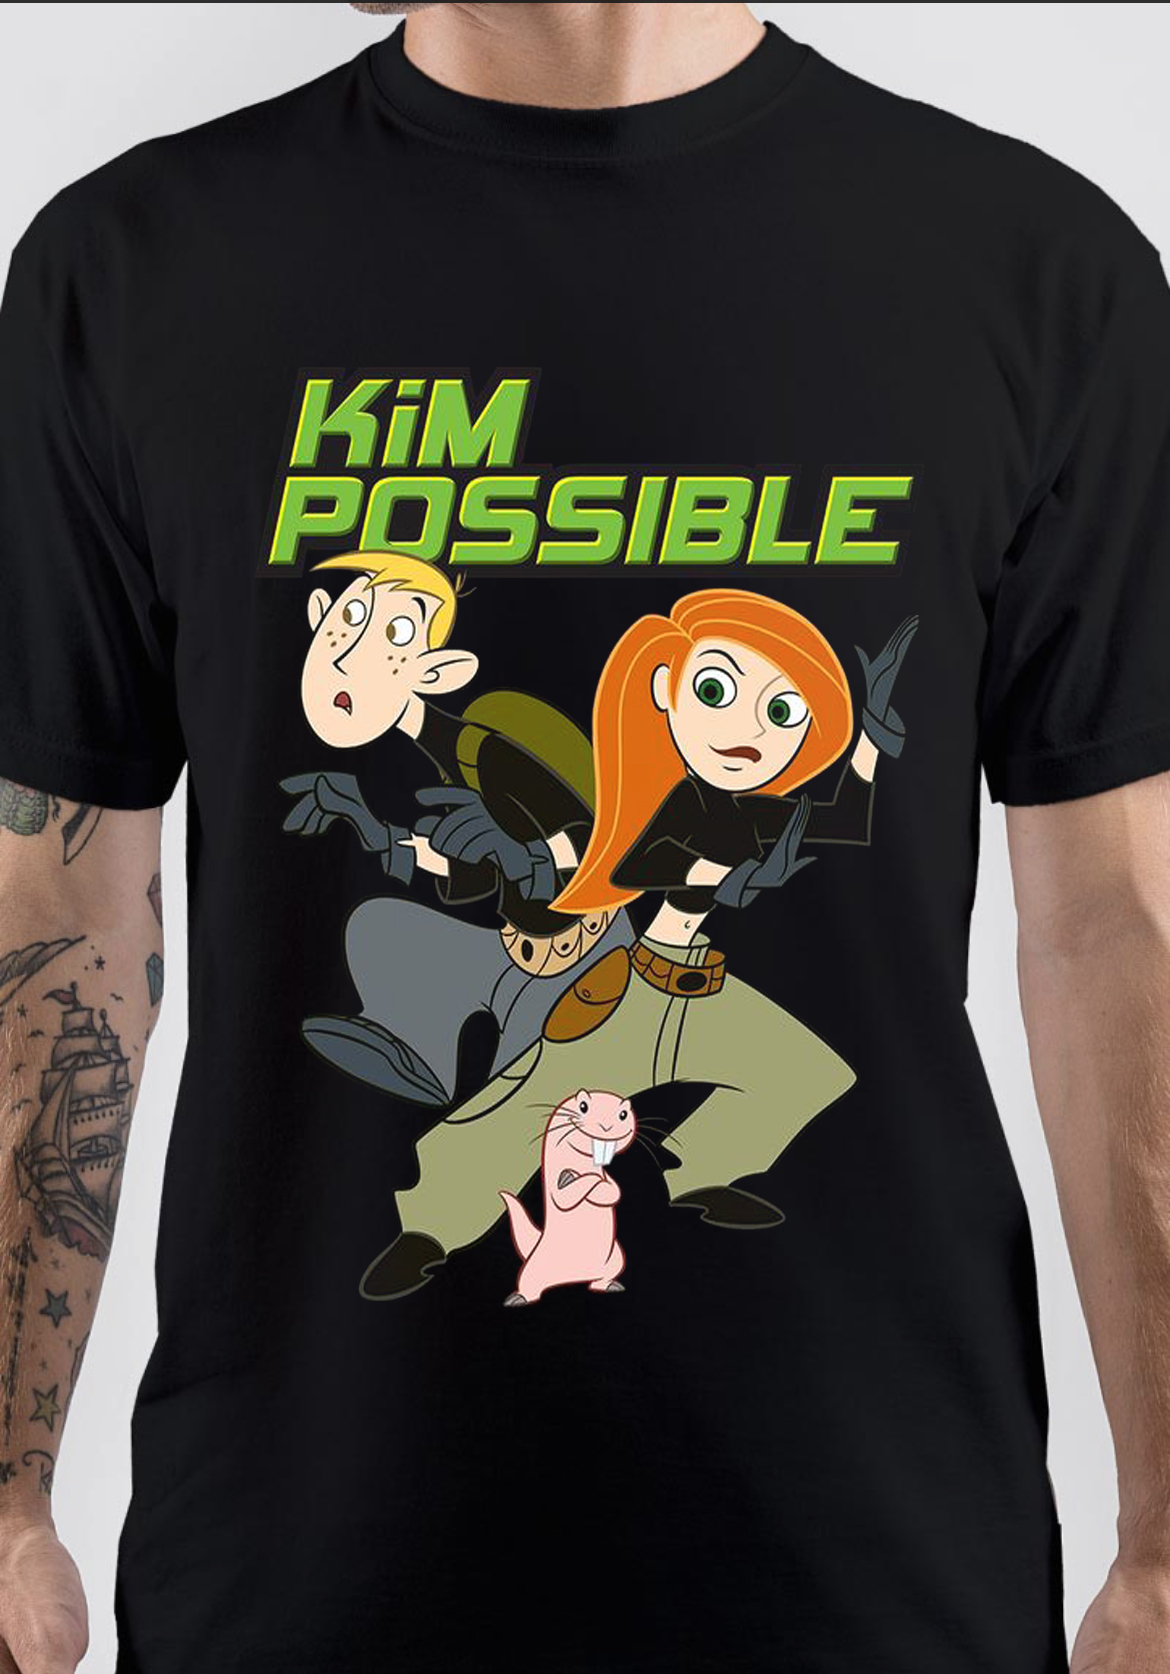 Kim Possible T-Shirt And Merchandise